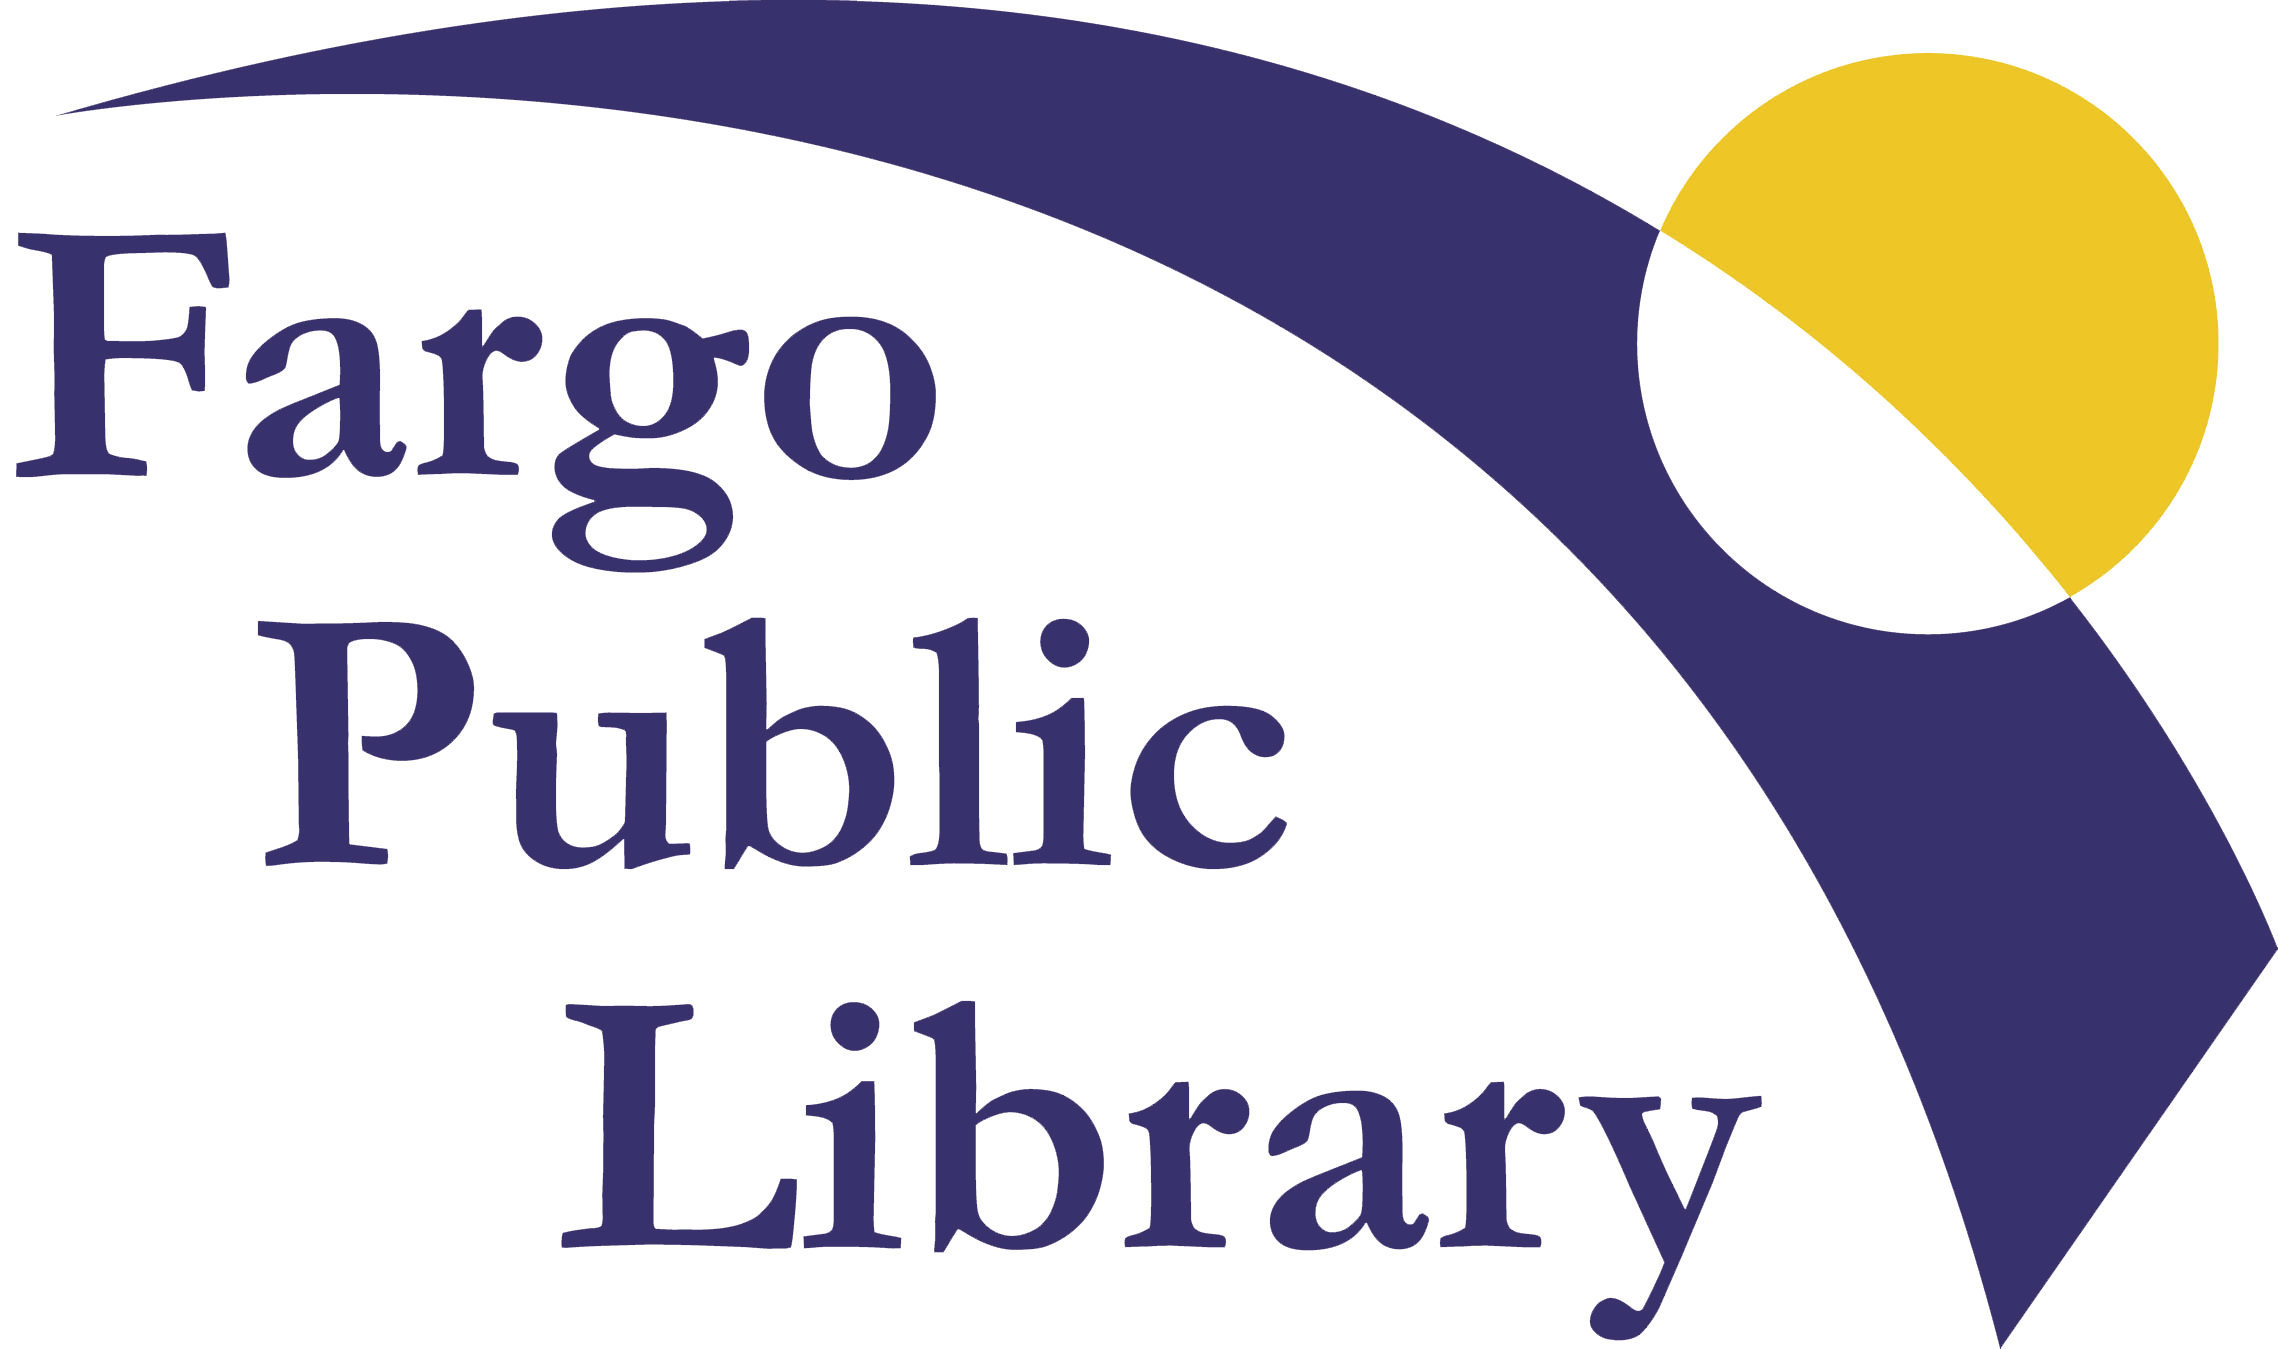 This image shows the logo for the Fargo Public Library.